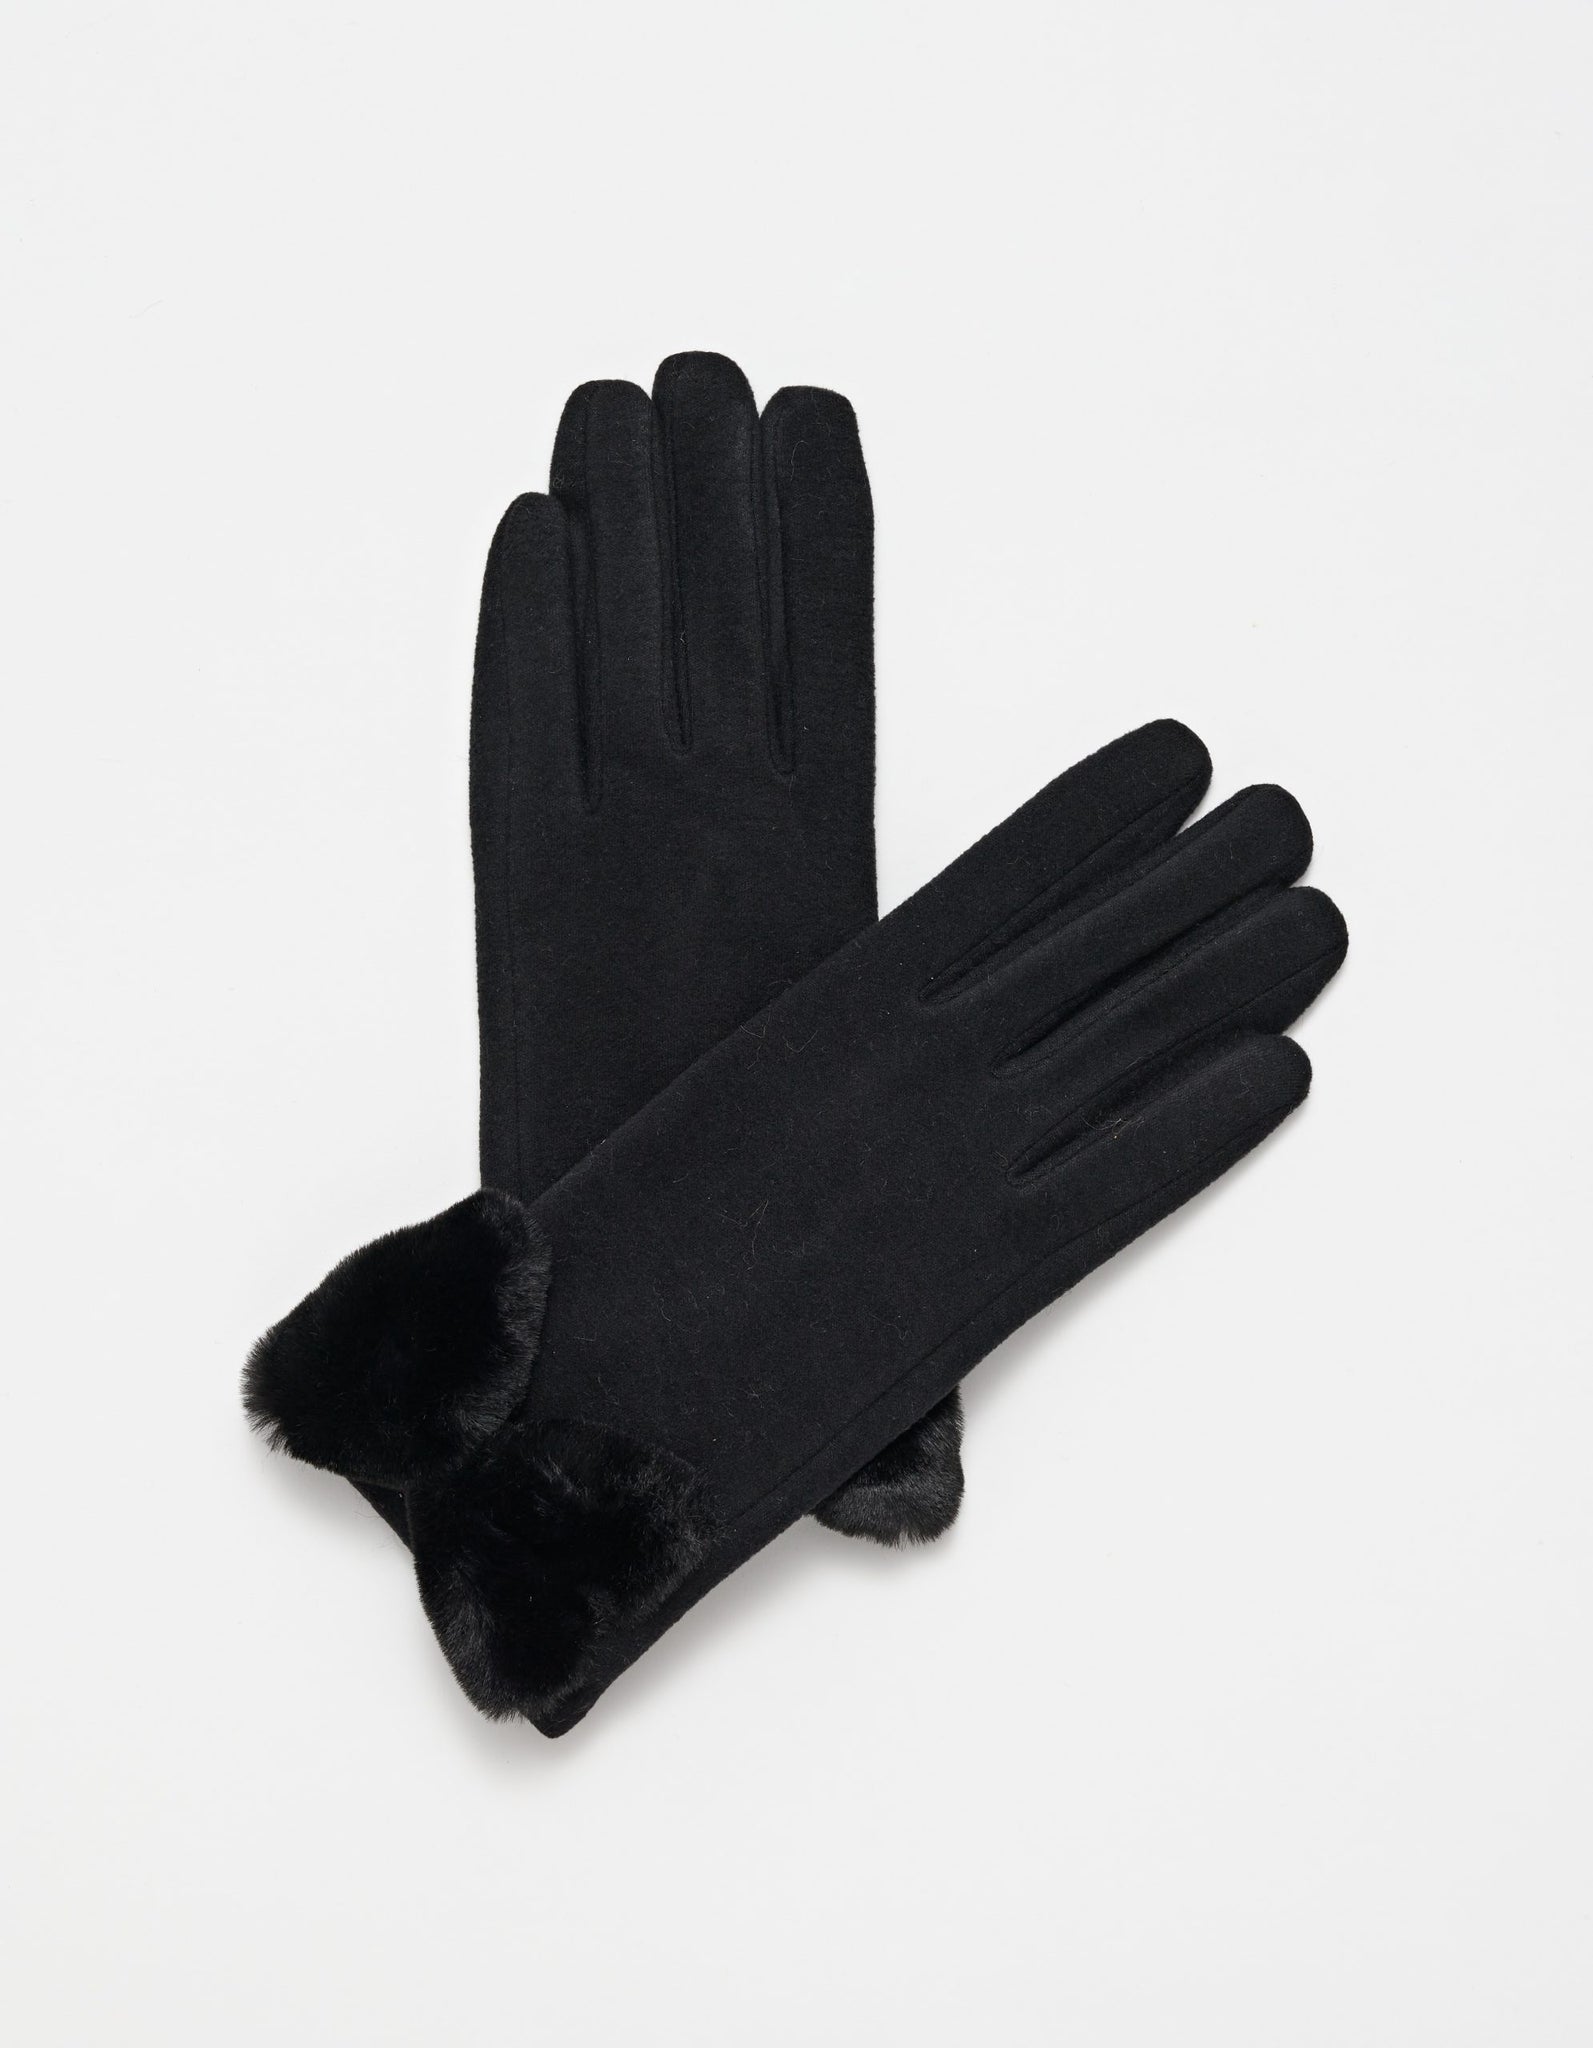 SGGL9133 Glove Black with Bow